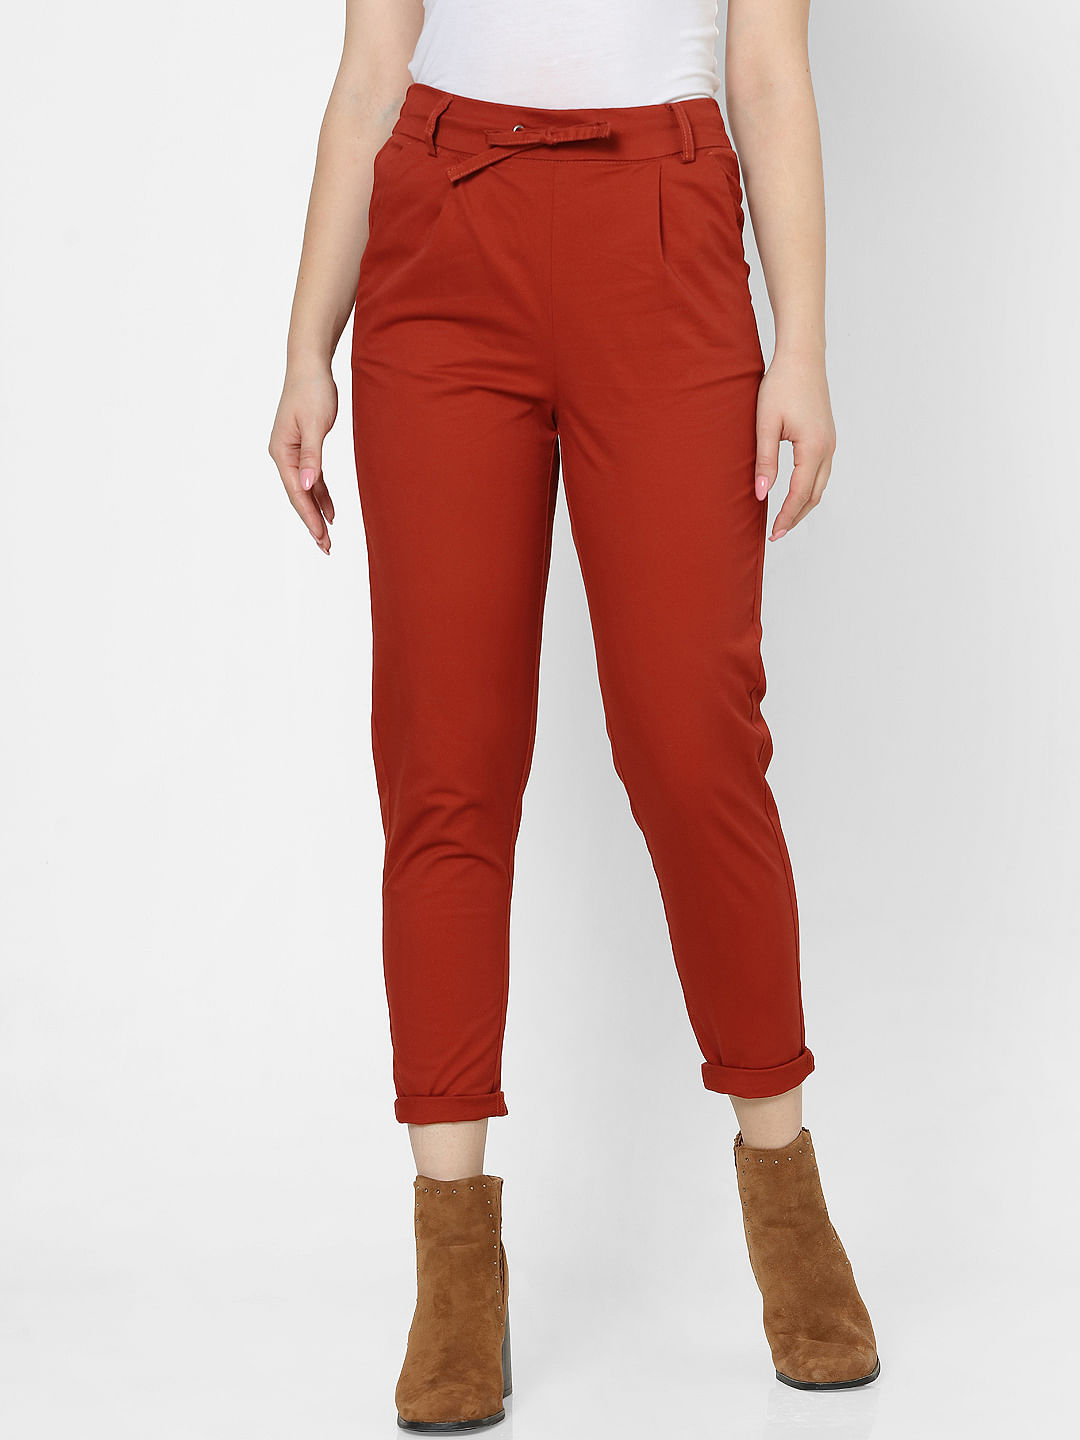 Biba Women Red Pants  Get Best Price from Manufacturers  Suppliers in  India